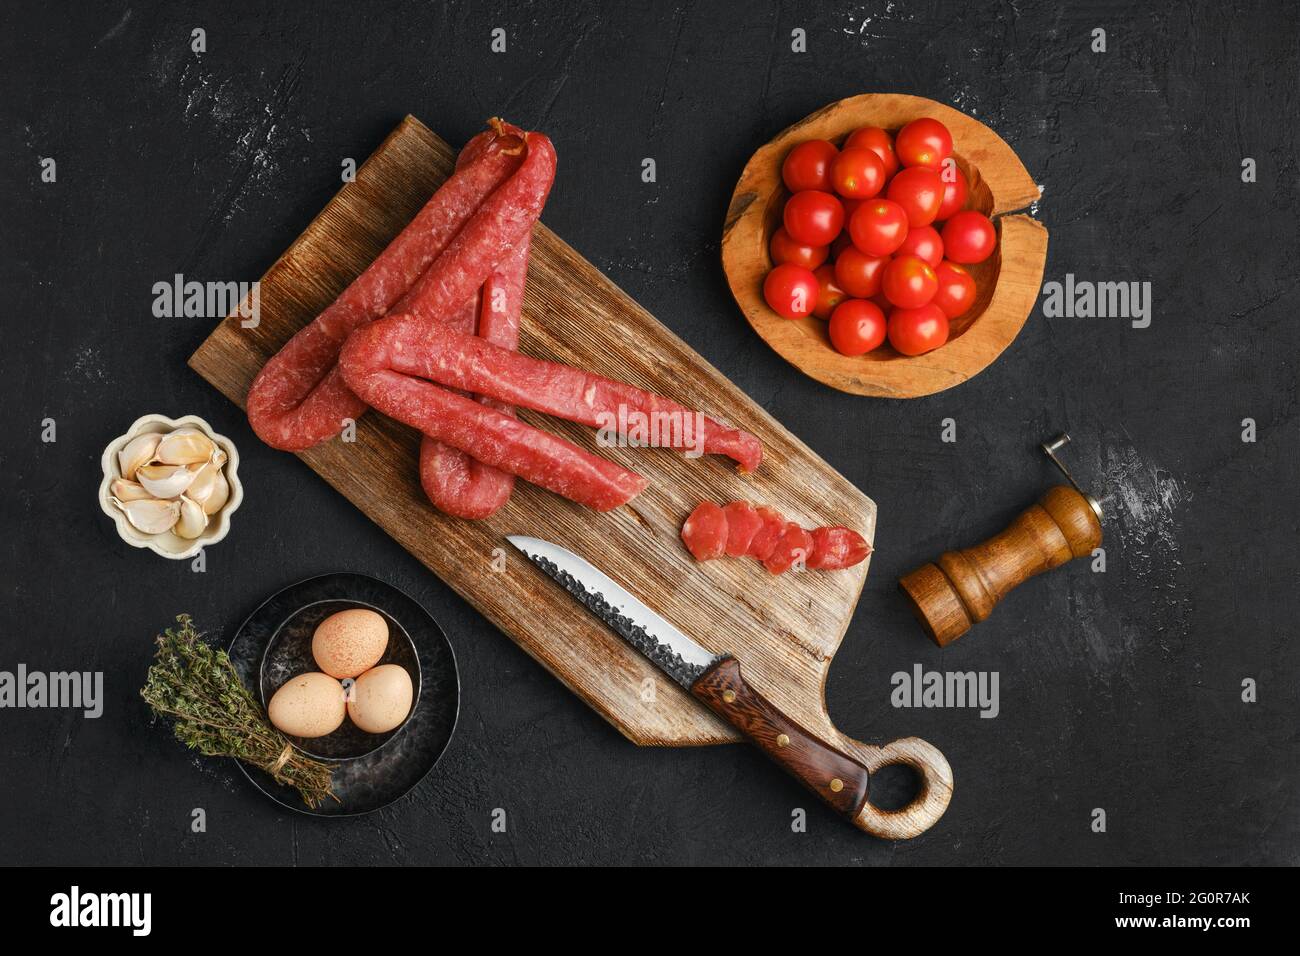 Air dried turkey sausage. Rustic lunch with eggs and tomato. Stock Photo